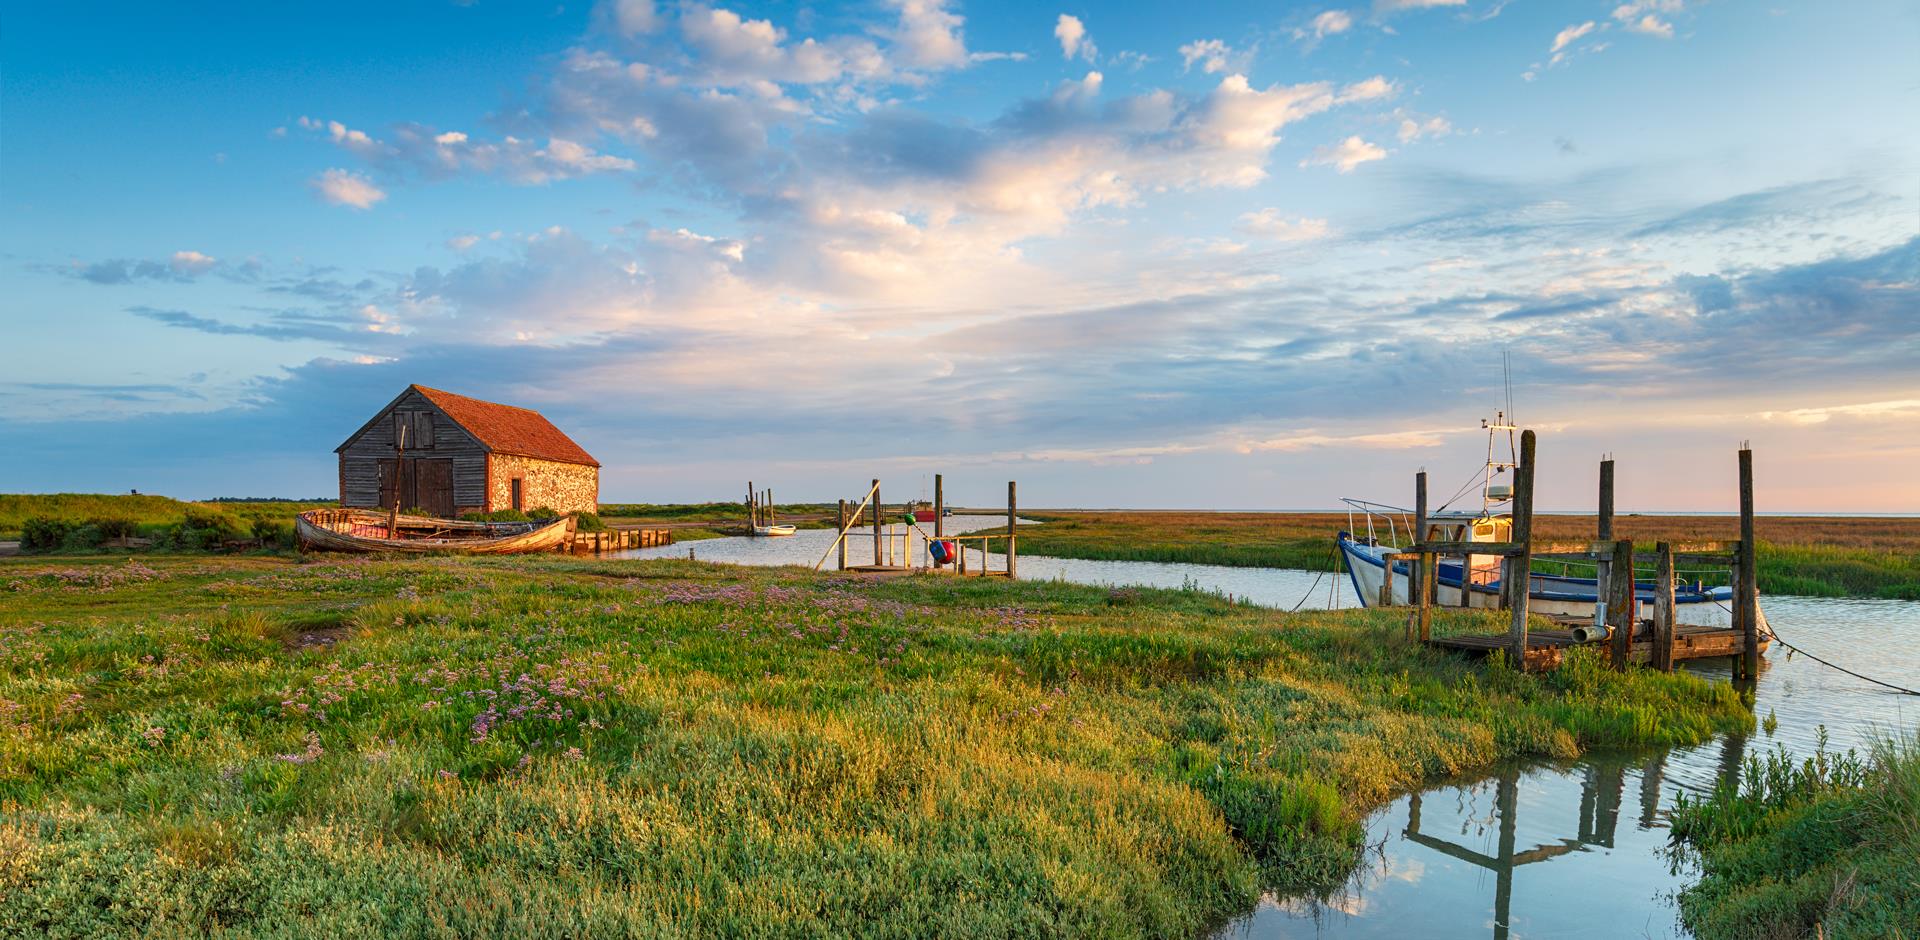 Picturesque old harbour and salt marshes at Thornham, Norfolk.